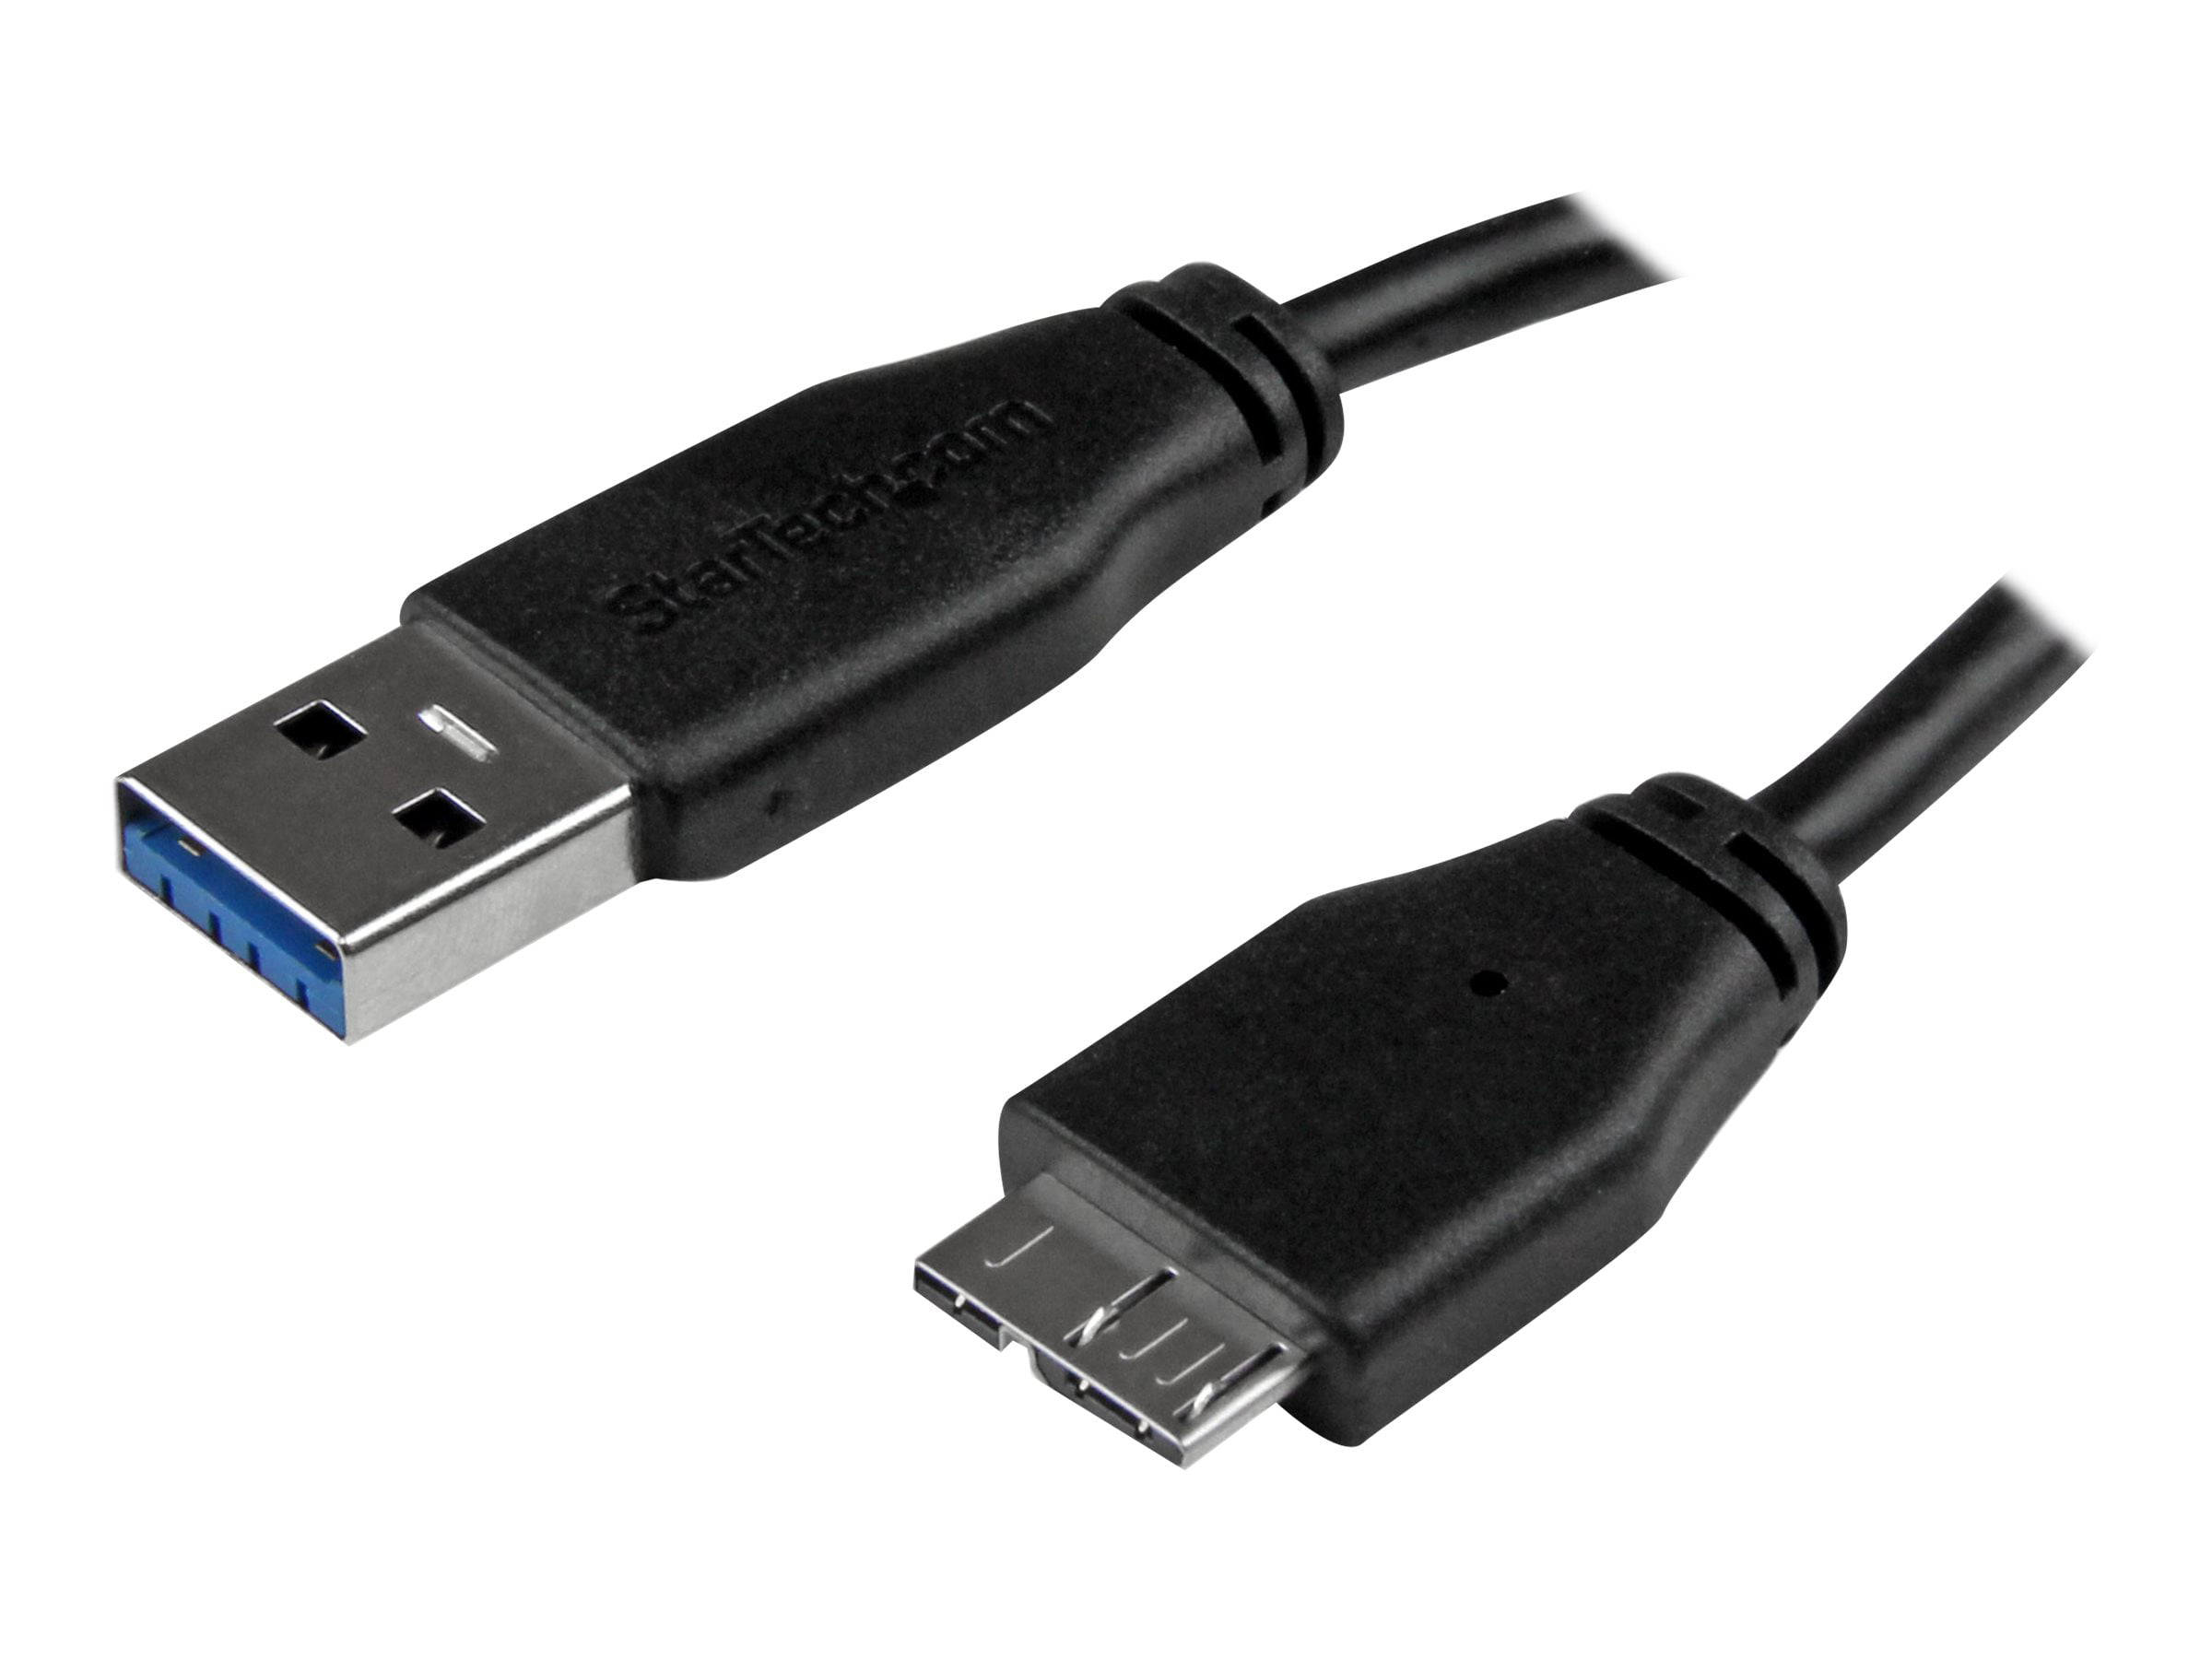 L-com WPUSB Series Waterproof USB Cable with Type A M/F 0.5M